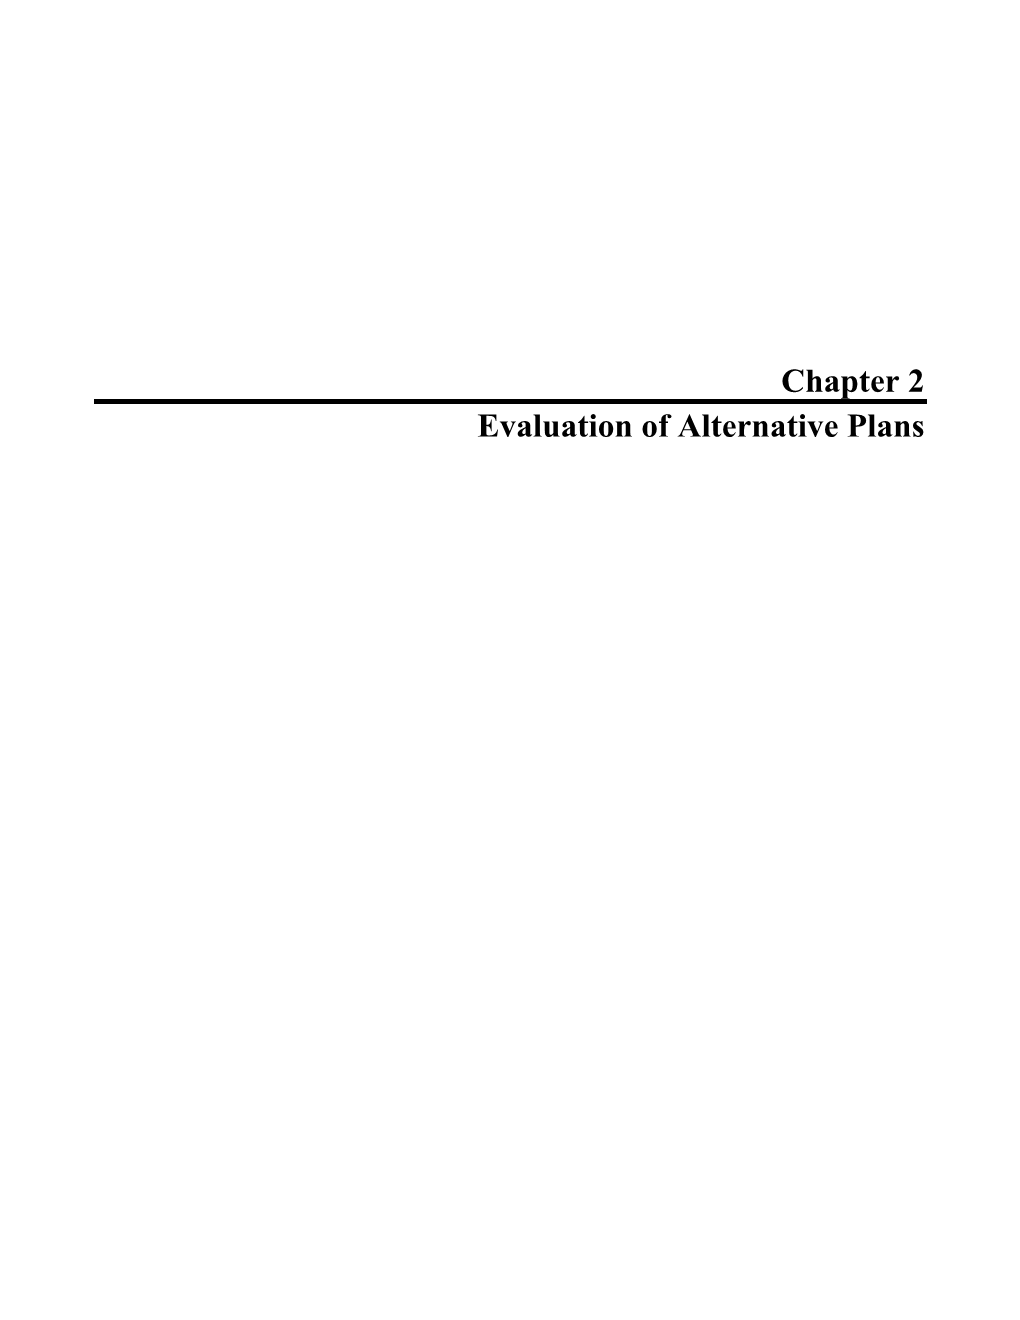 Chapter 2 Evaluation of Alternative Plans CHAPTER 2